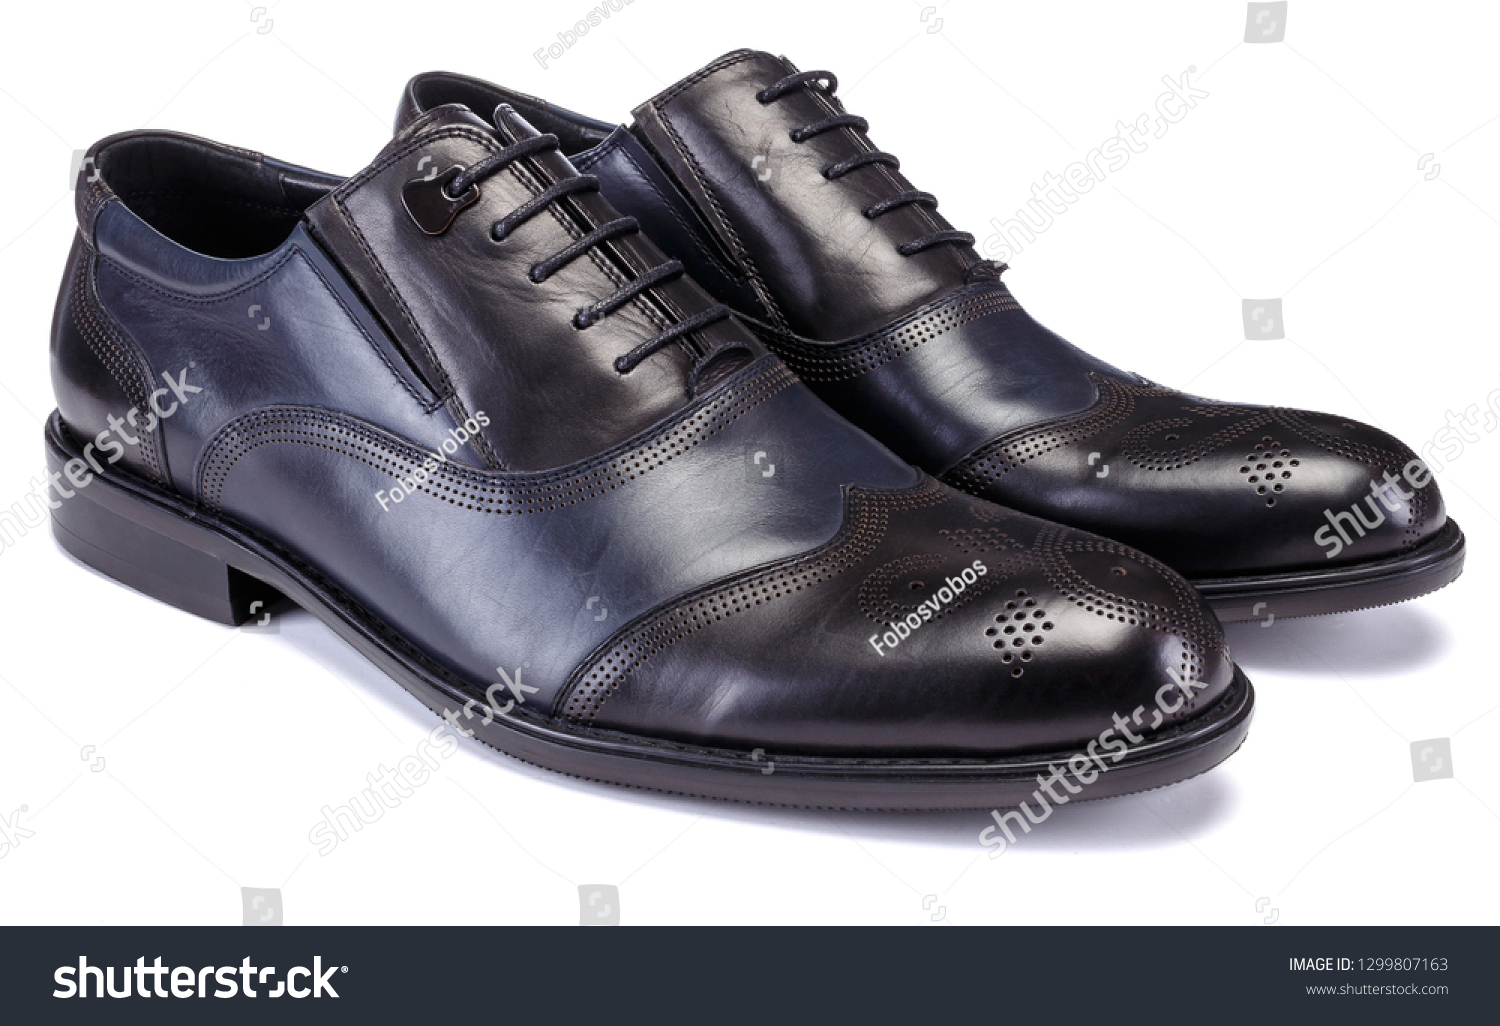 Black shoe for male on white background. #1299807163